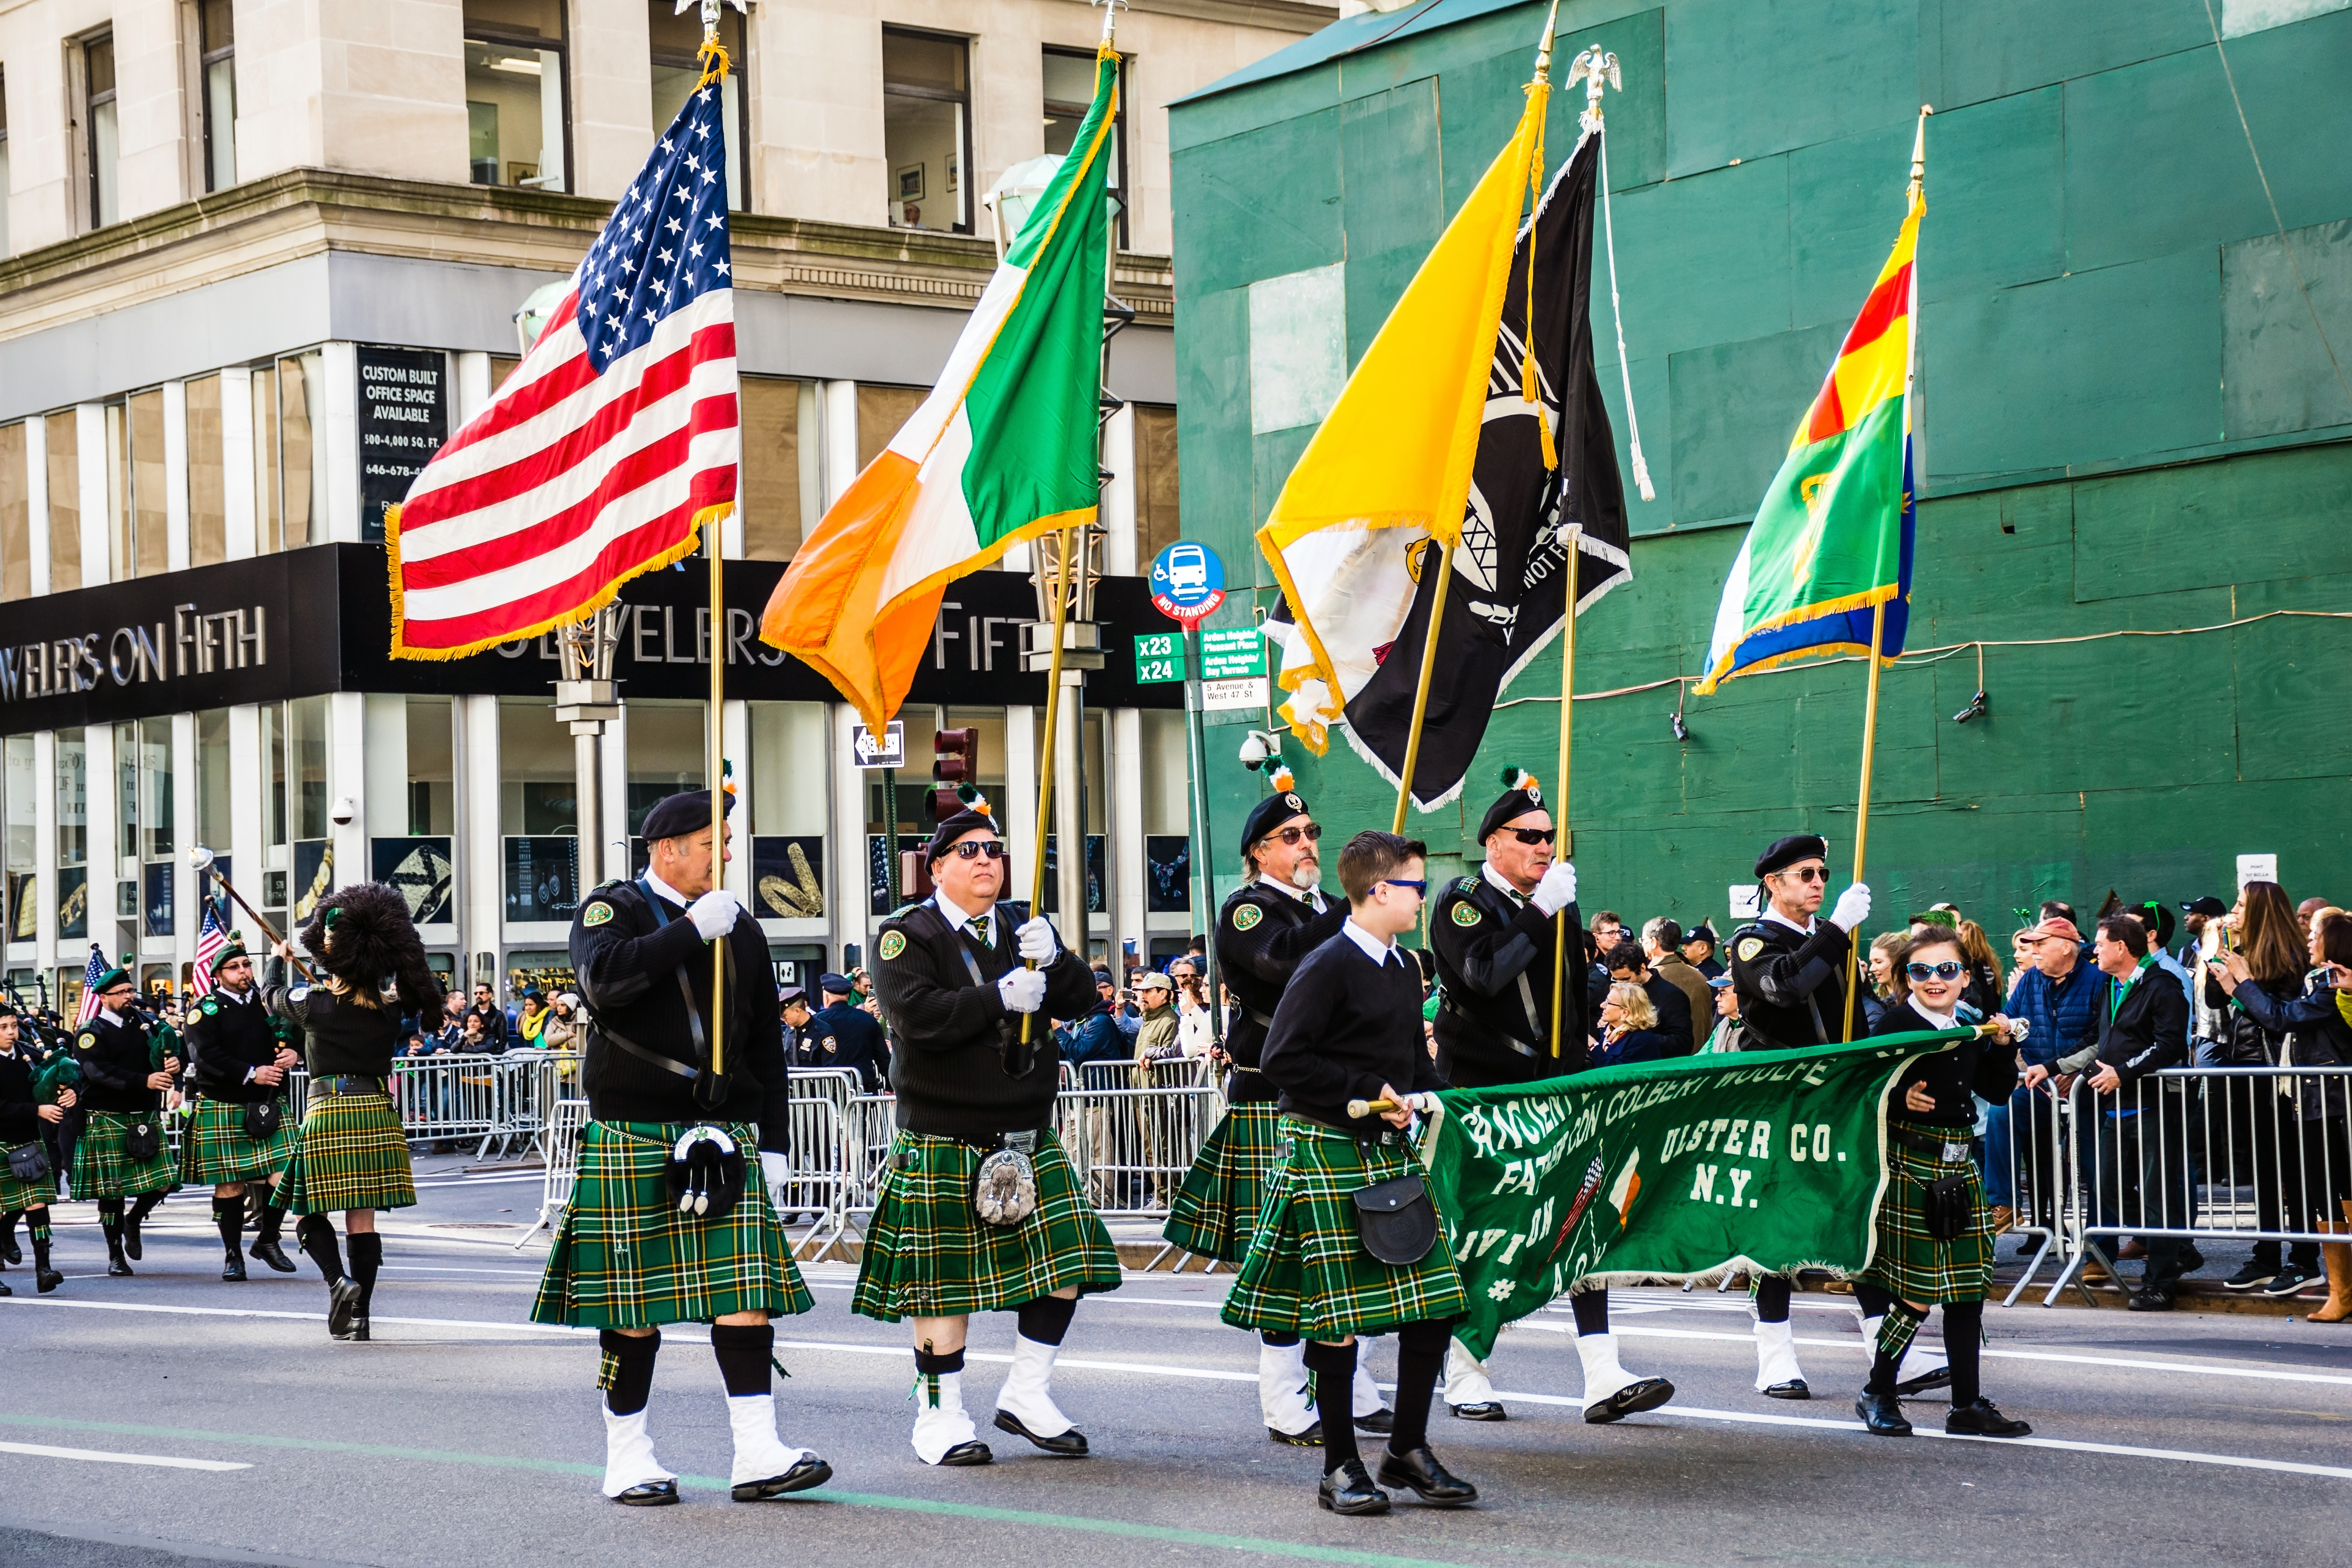 Men in kilts holding flags marching in the New York City St. Patrick's Day parade